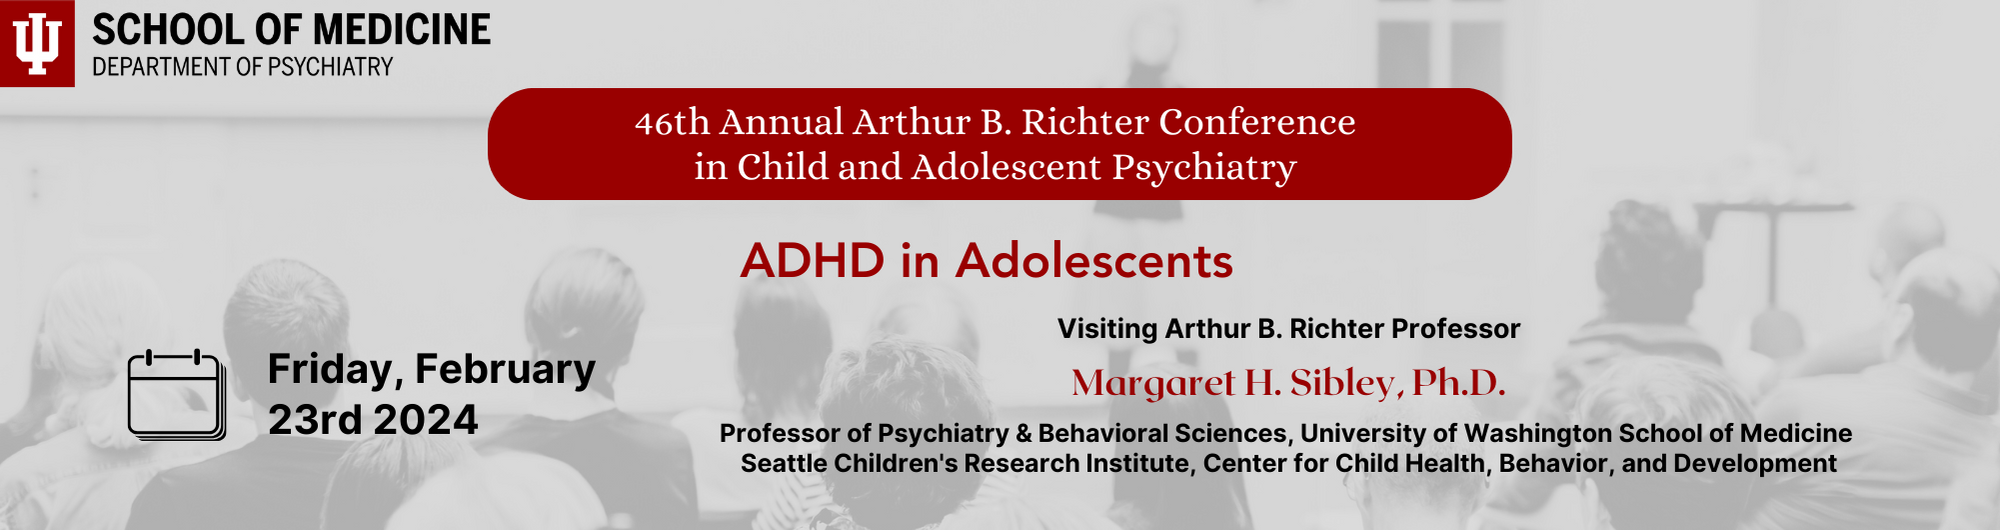 46th Annual Arthur B. Richter Conference in Child and Adolescent Psychiatry Theme:  ADHD in Adolescents Banner